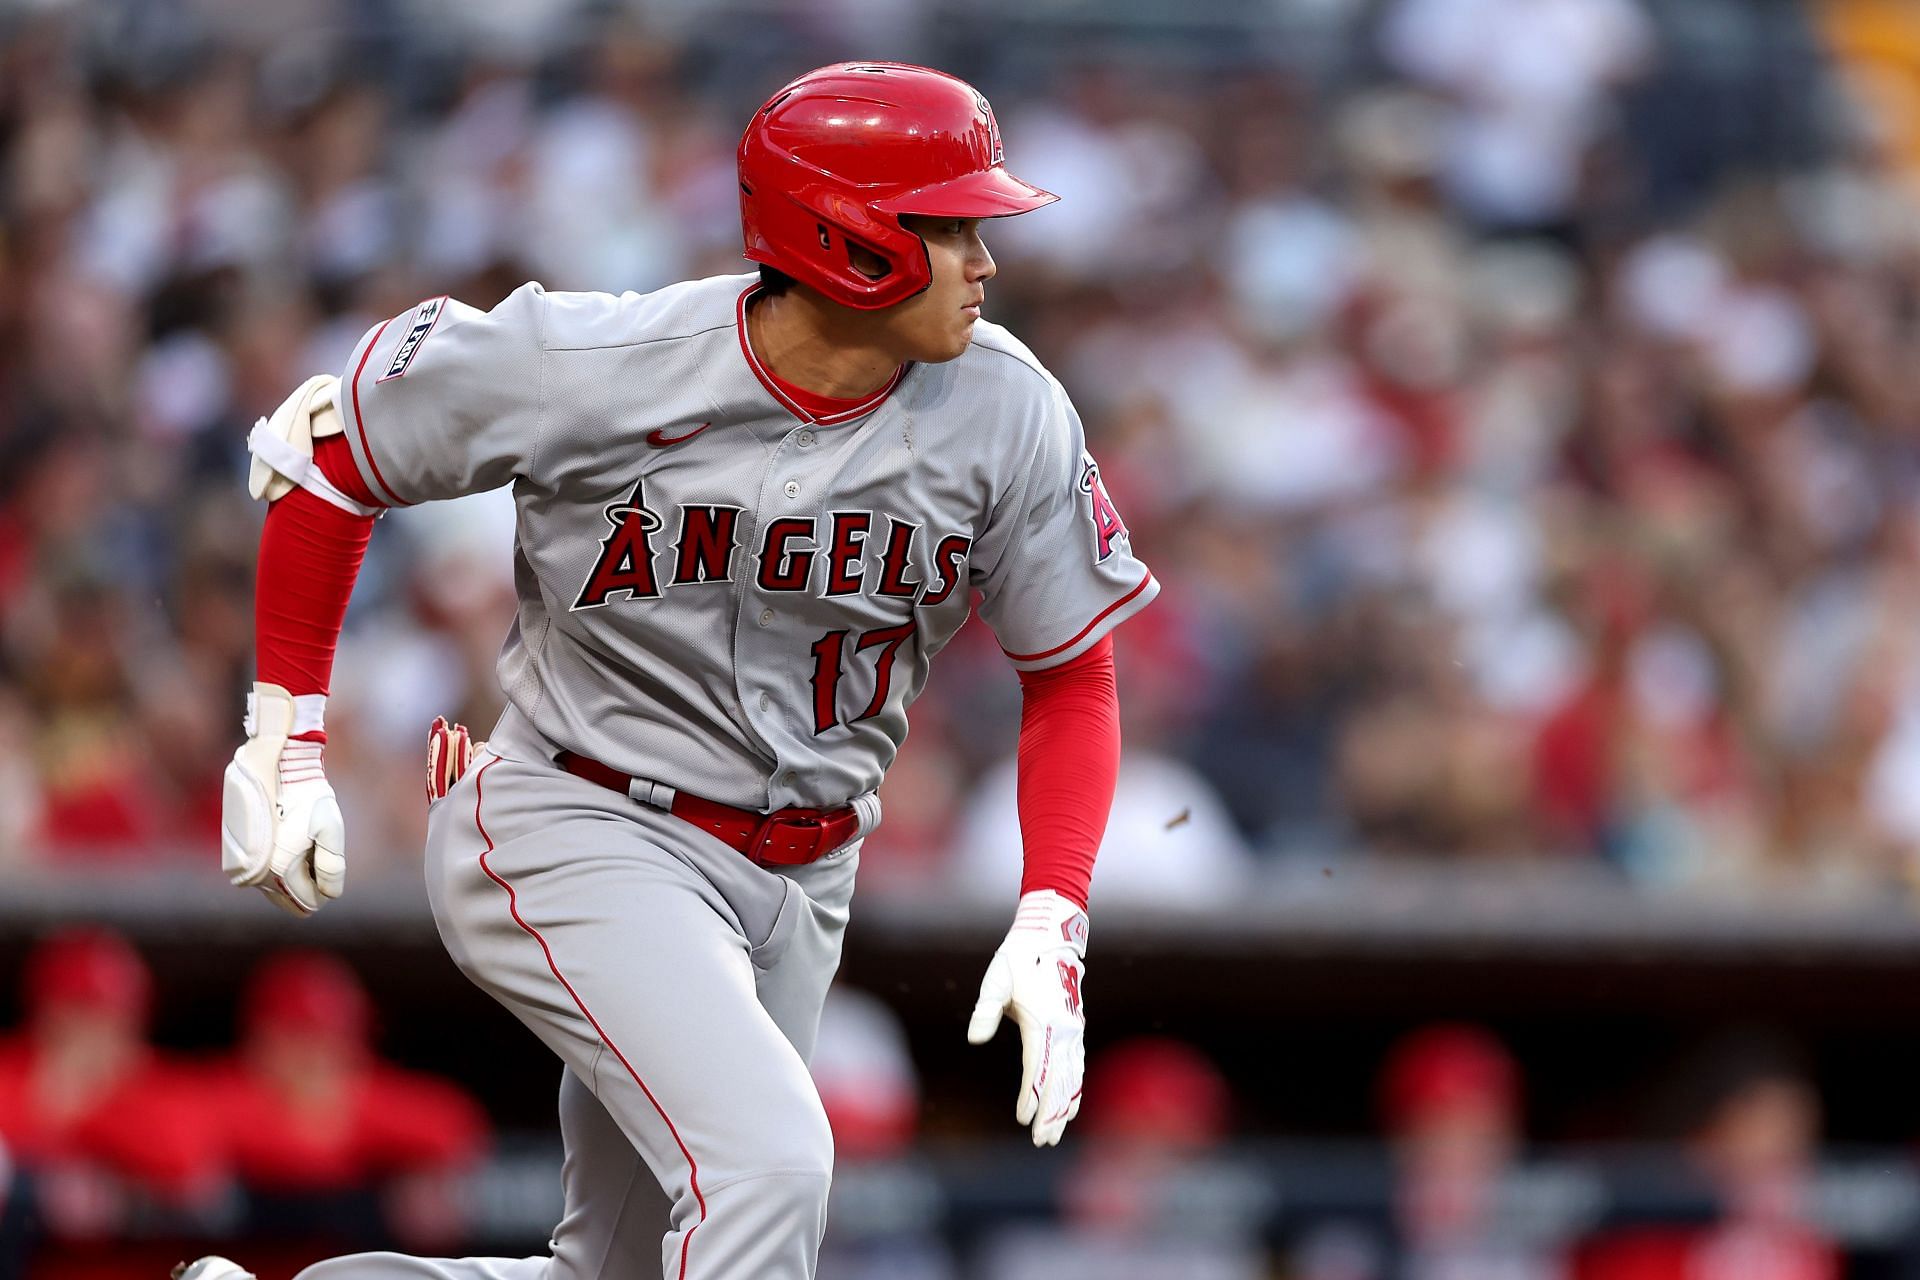 SAN DIEGO, CALIFORNIA - JULY 03: Shohei Ohtani #17 of the Los Angeles Angels grounds into a fielders choice during the third inning of a game against the San Diego Padres at PETCO Park on July 03, 2023 in San Diego, California. (Photo by Sean M. Haffey/Getty Images)